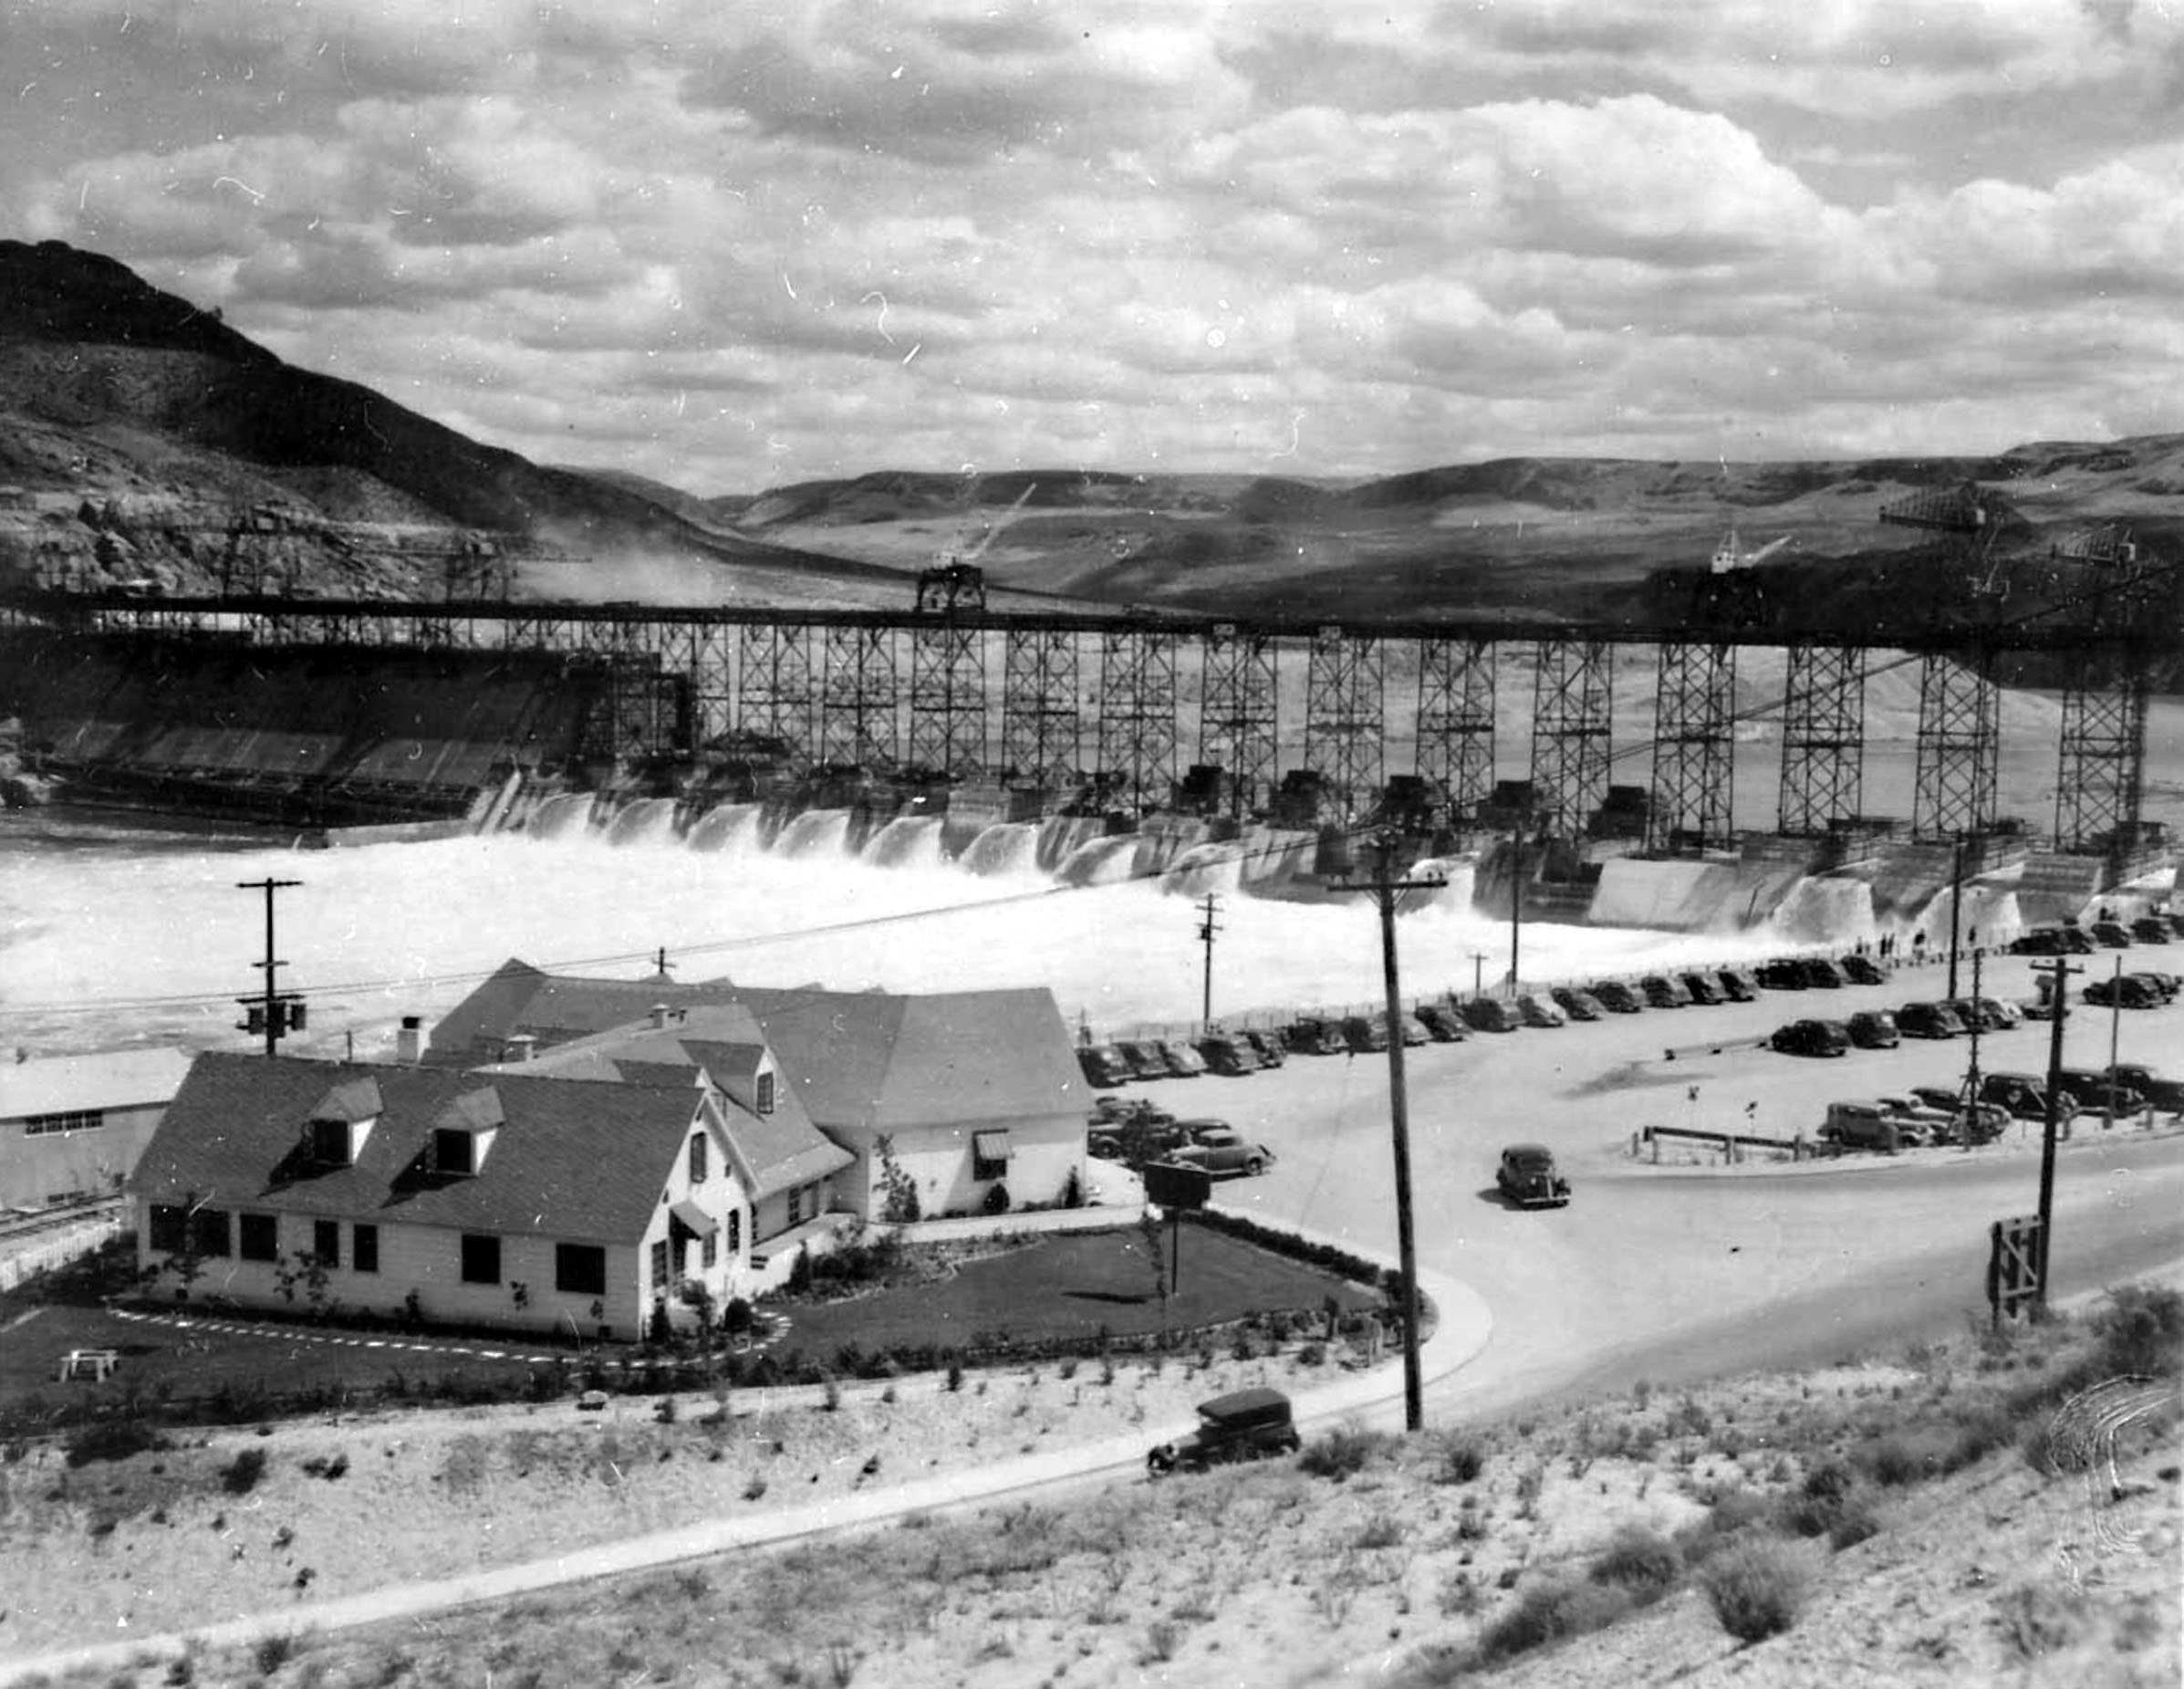 Photo taken July 4, 1939. The Green Hut restaurant in the foreground was built by C.D. Newland on leased land here at Grand Coulee Dam.